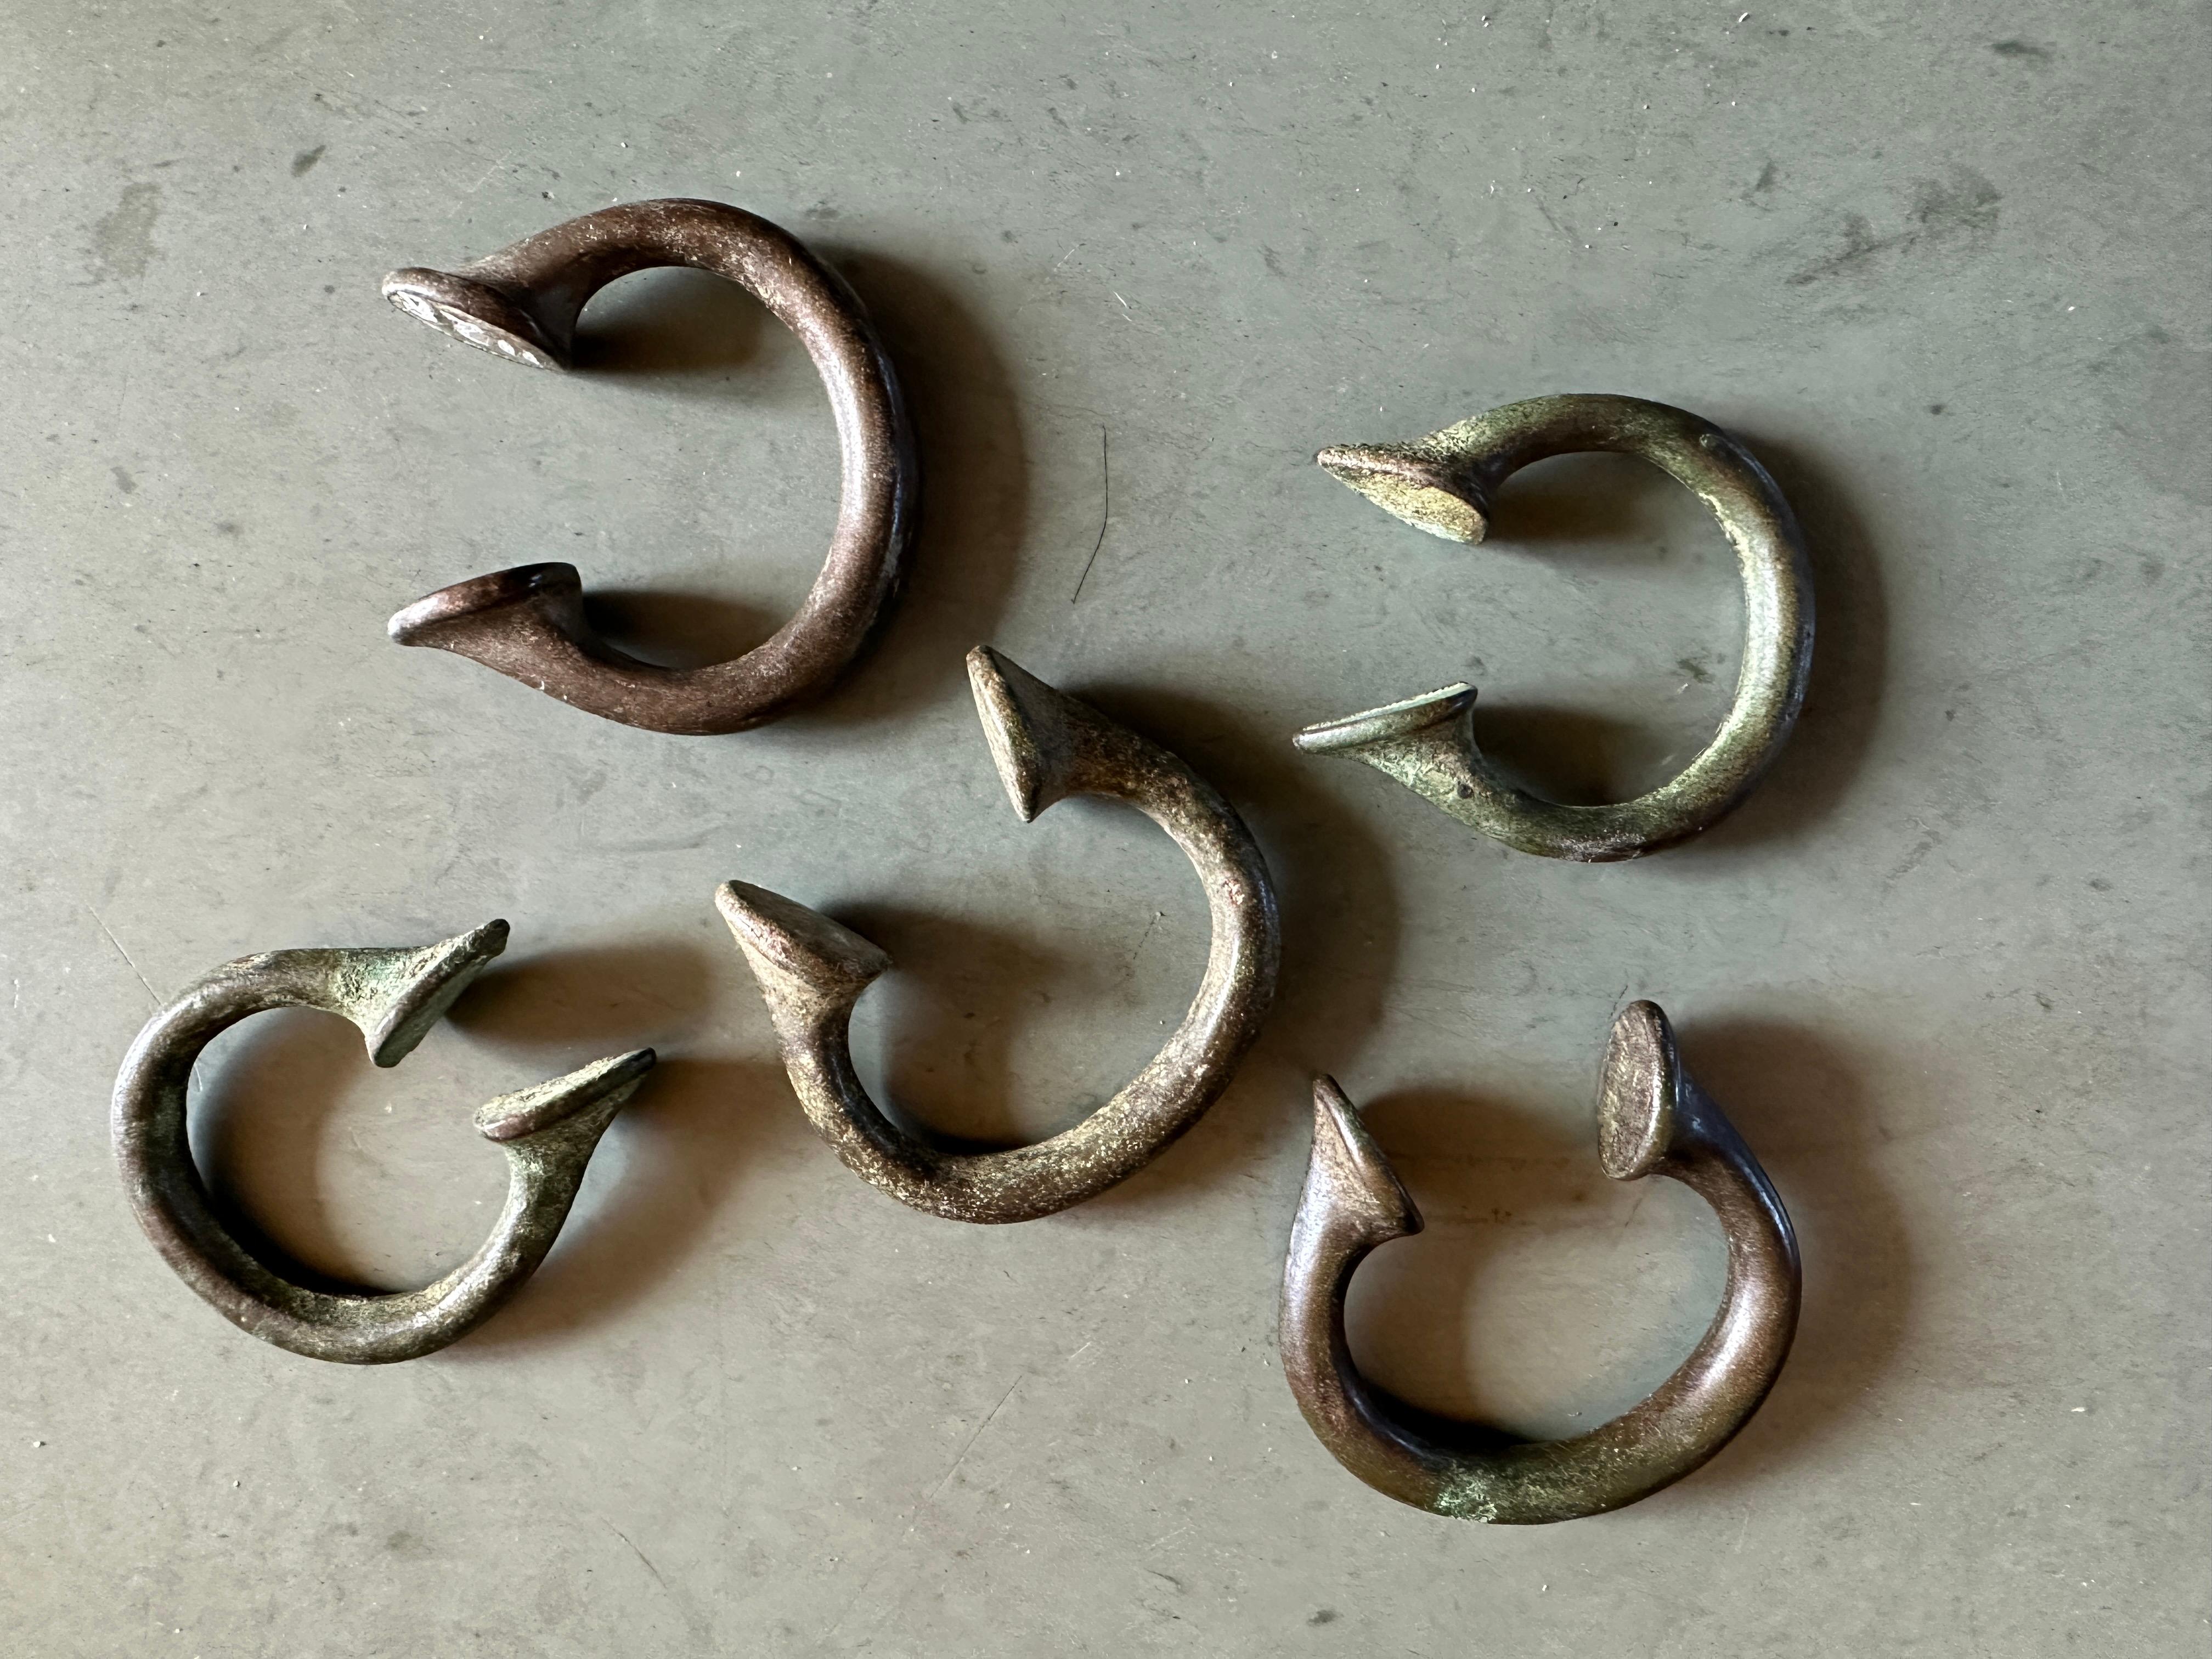 Manillas are horse-shoe shaped, made of an open circle of bronze, brass, or copper with enlarged finial terminations. They were used as a currency in West African countries from the 15th up to the late 20th century. Manillas were brought to West